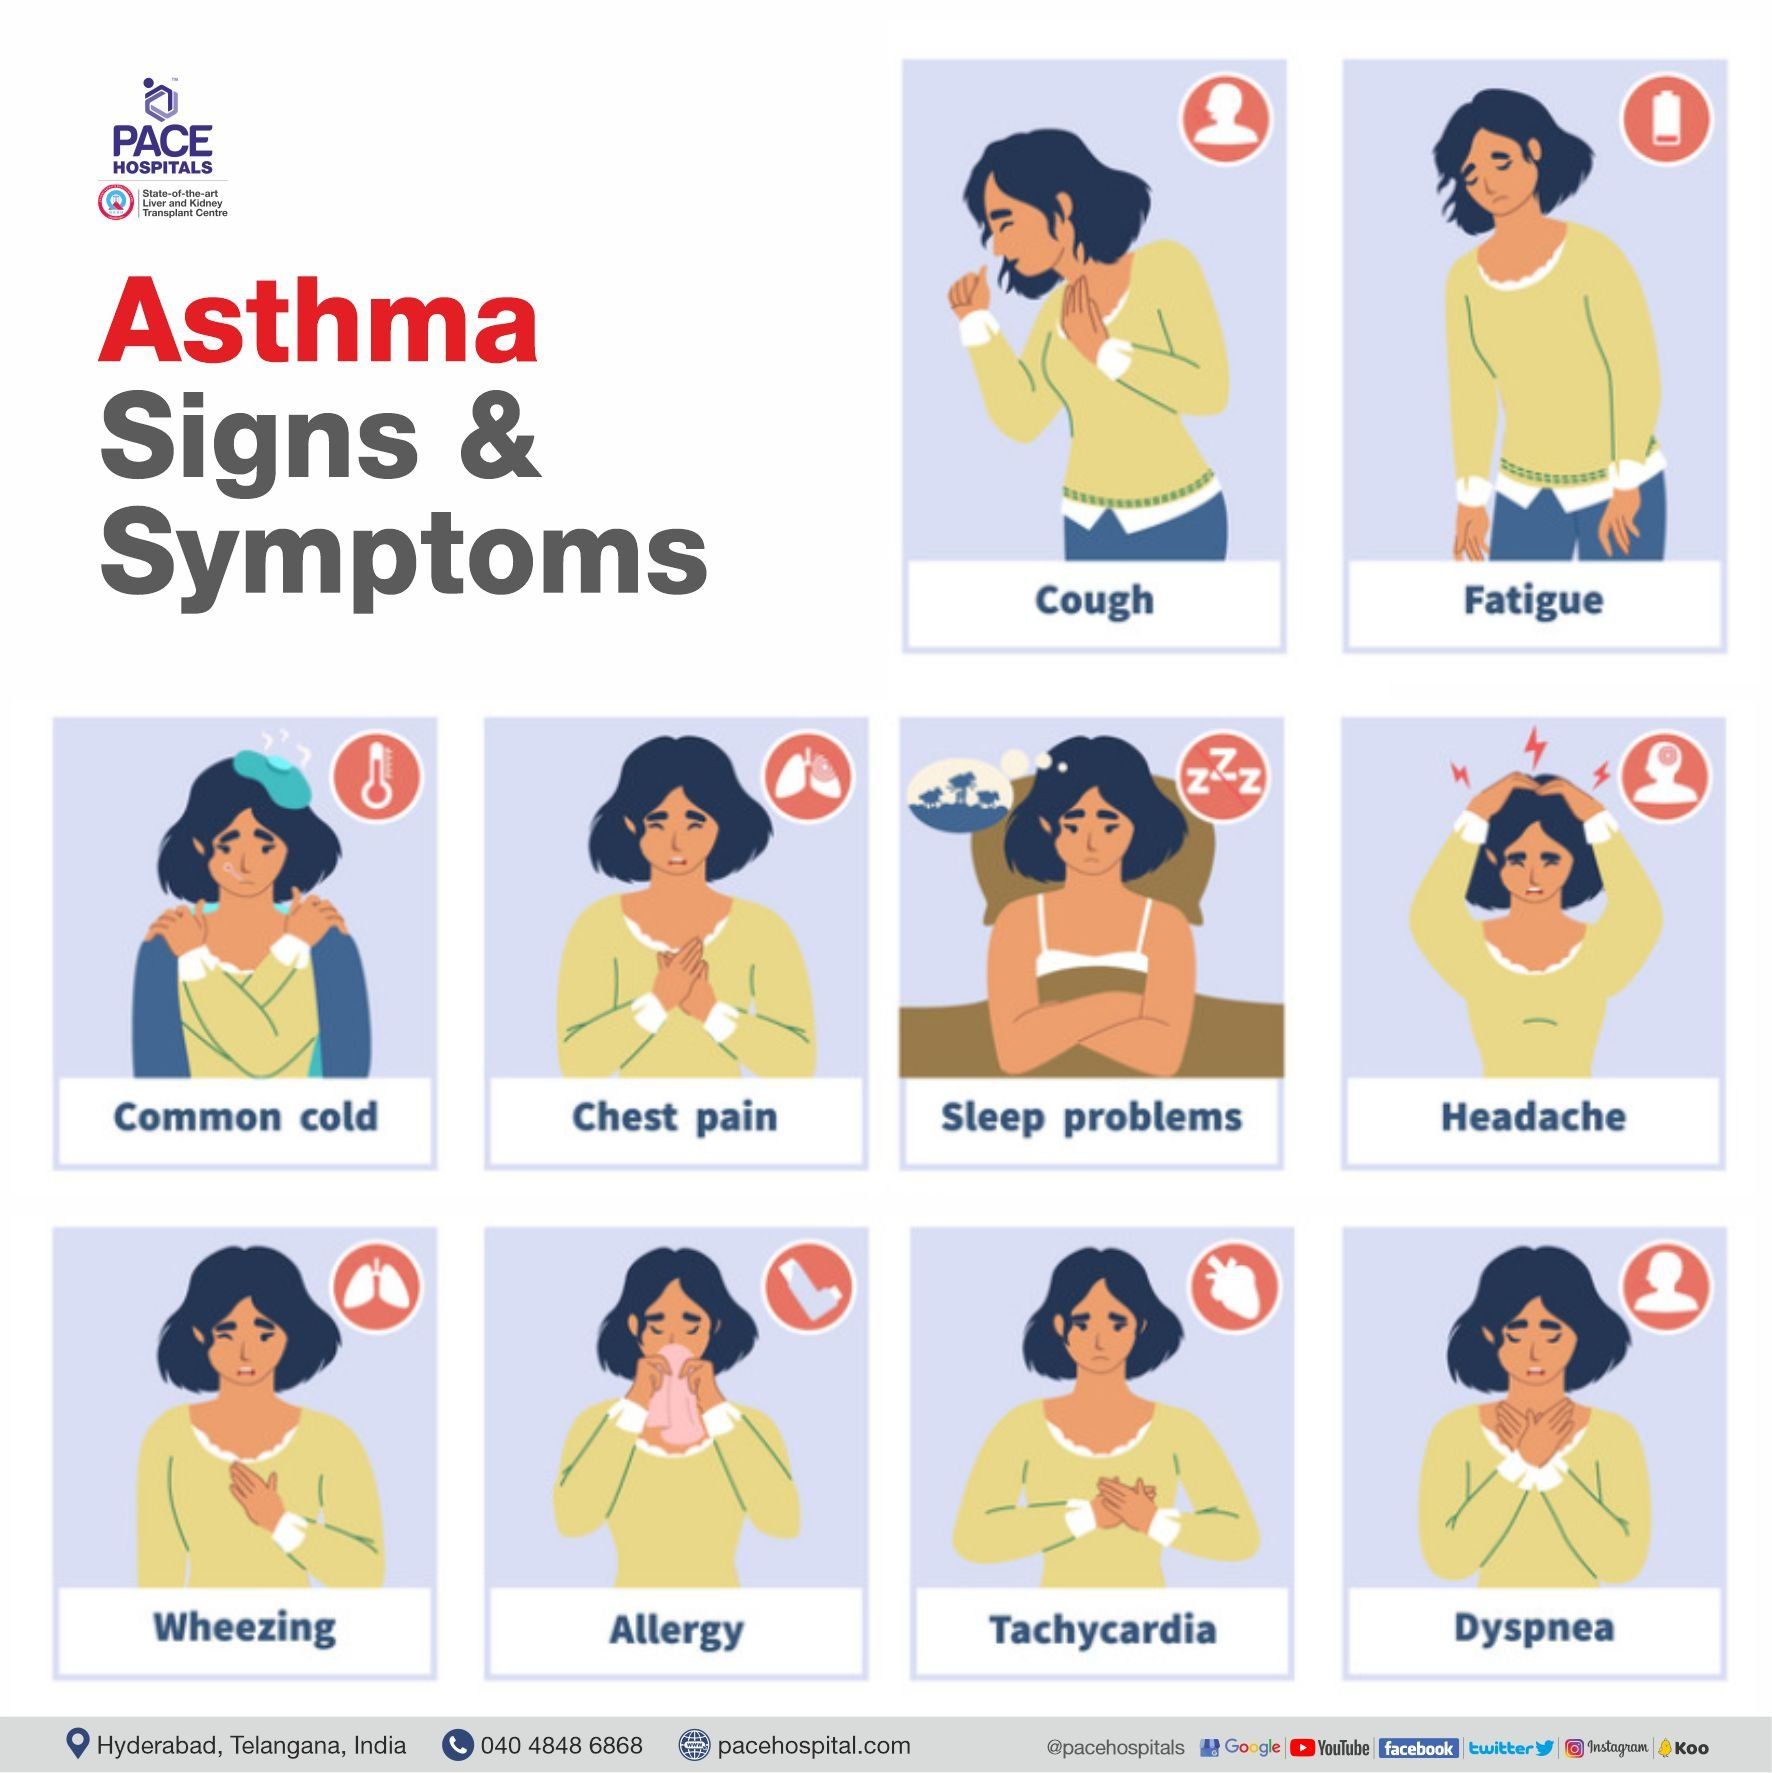 Asthma signs and symptoms, asthma symptoms in adults